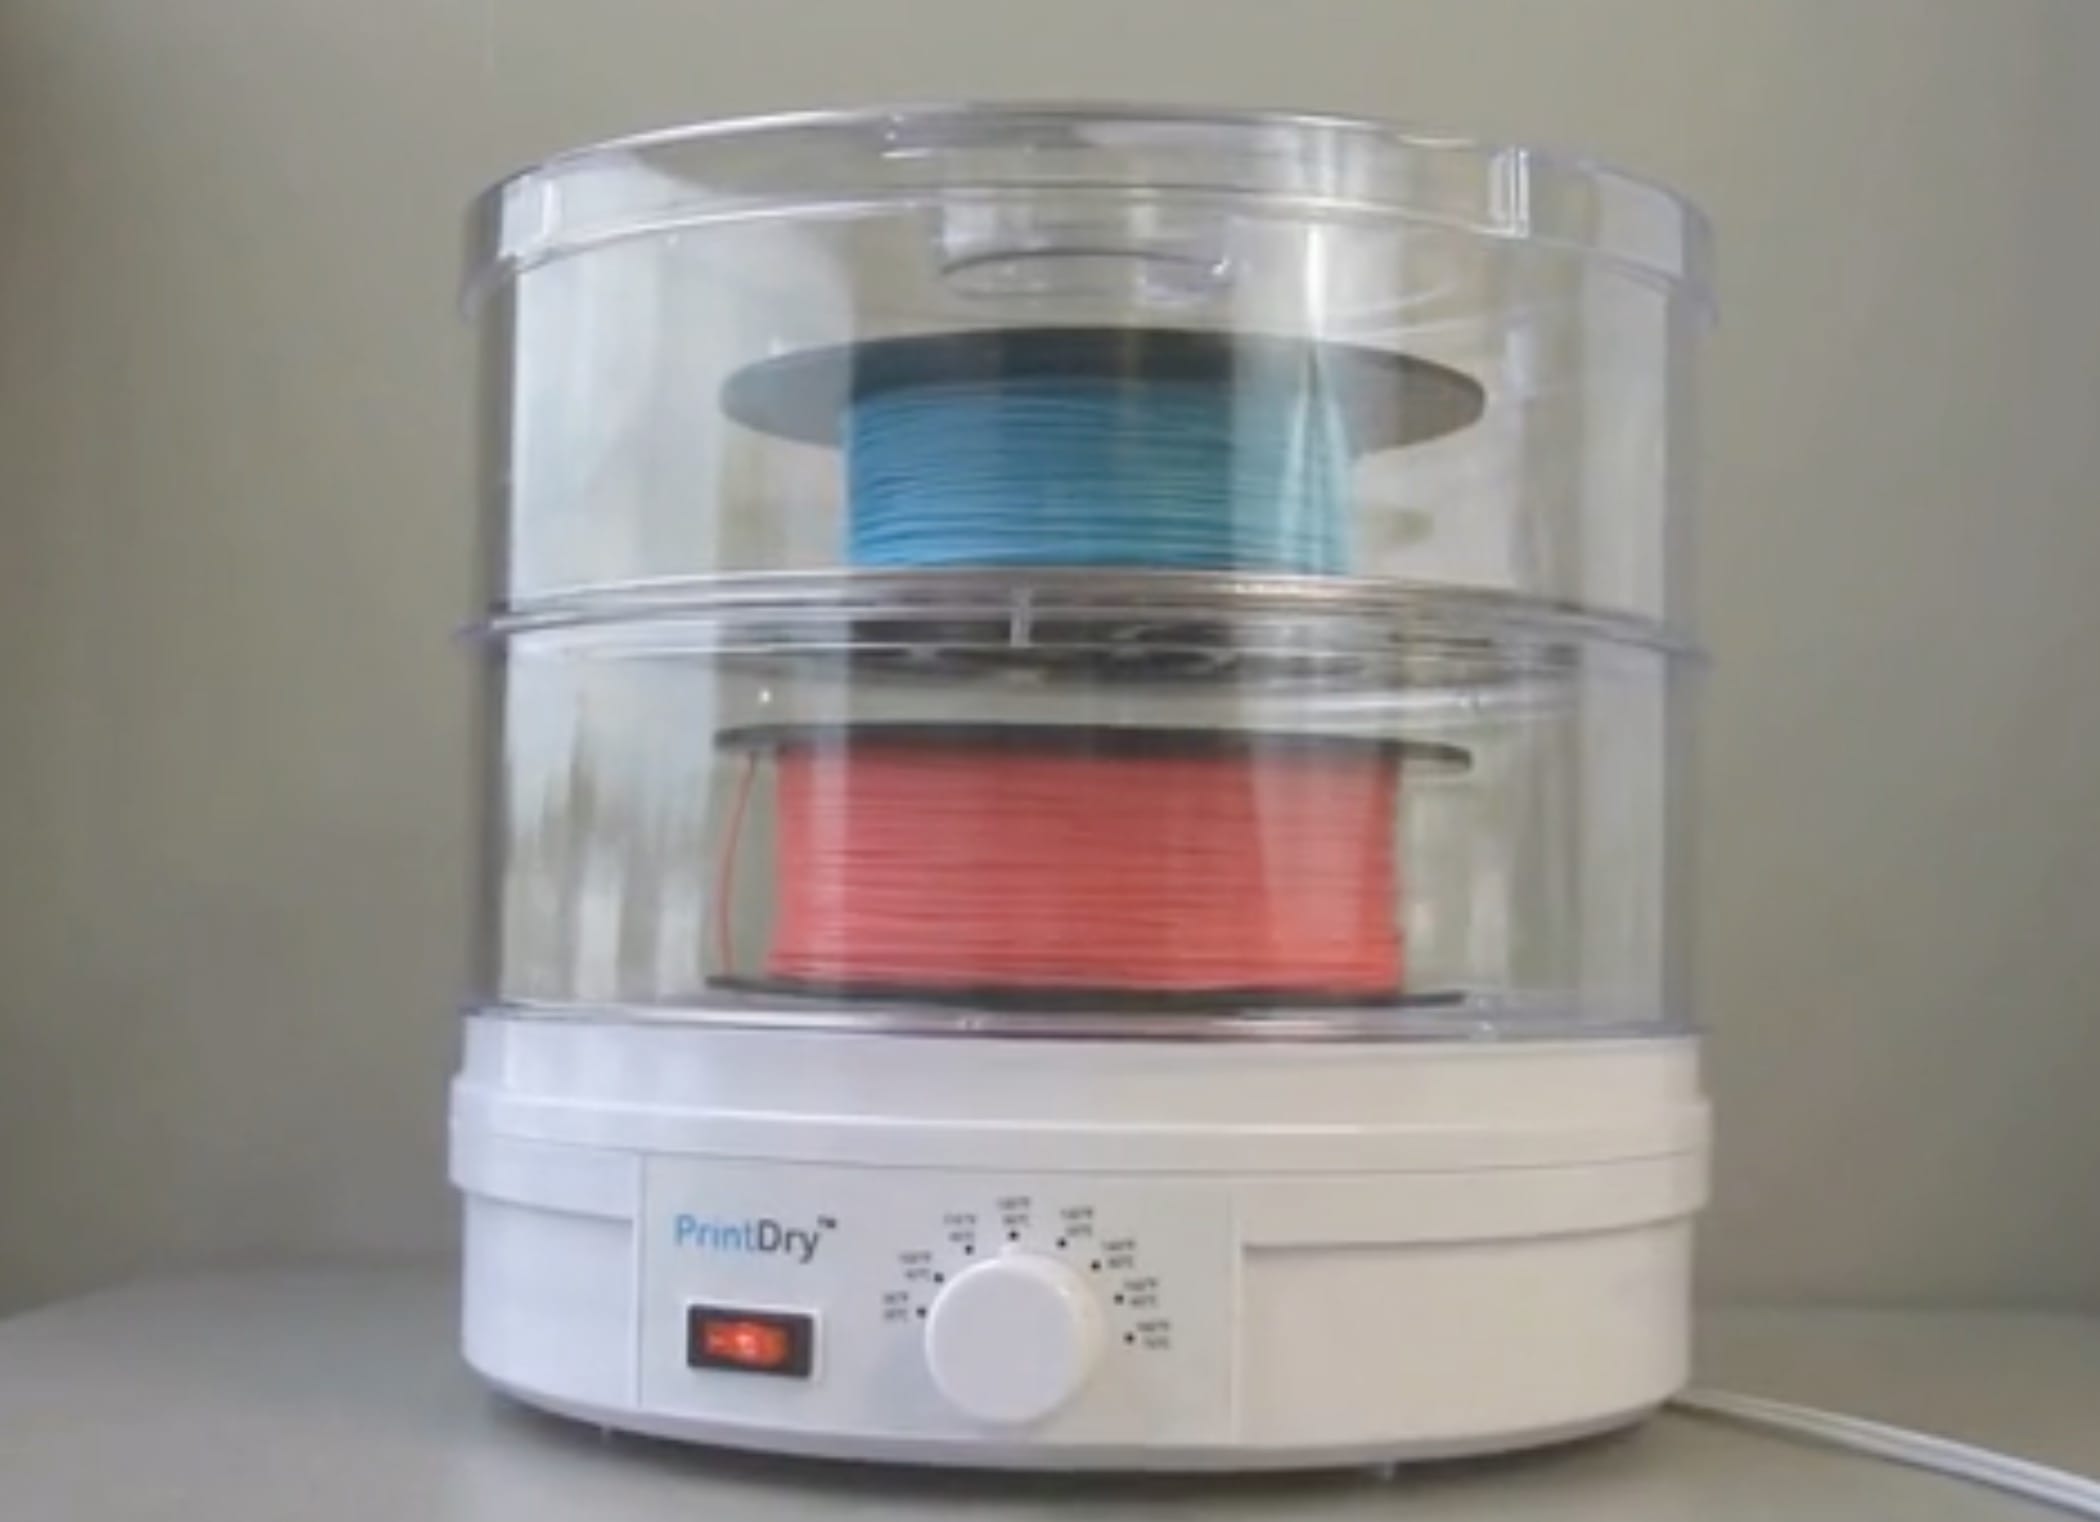  The PrintDry, a filament-drying 3D printing accessory 